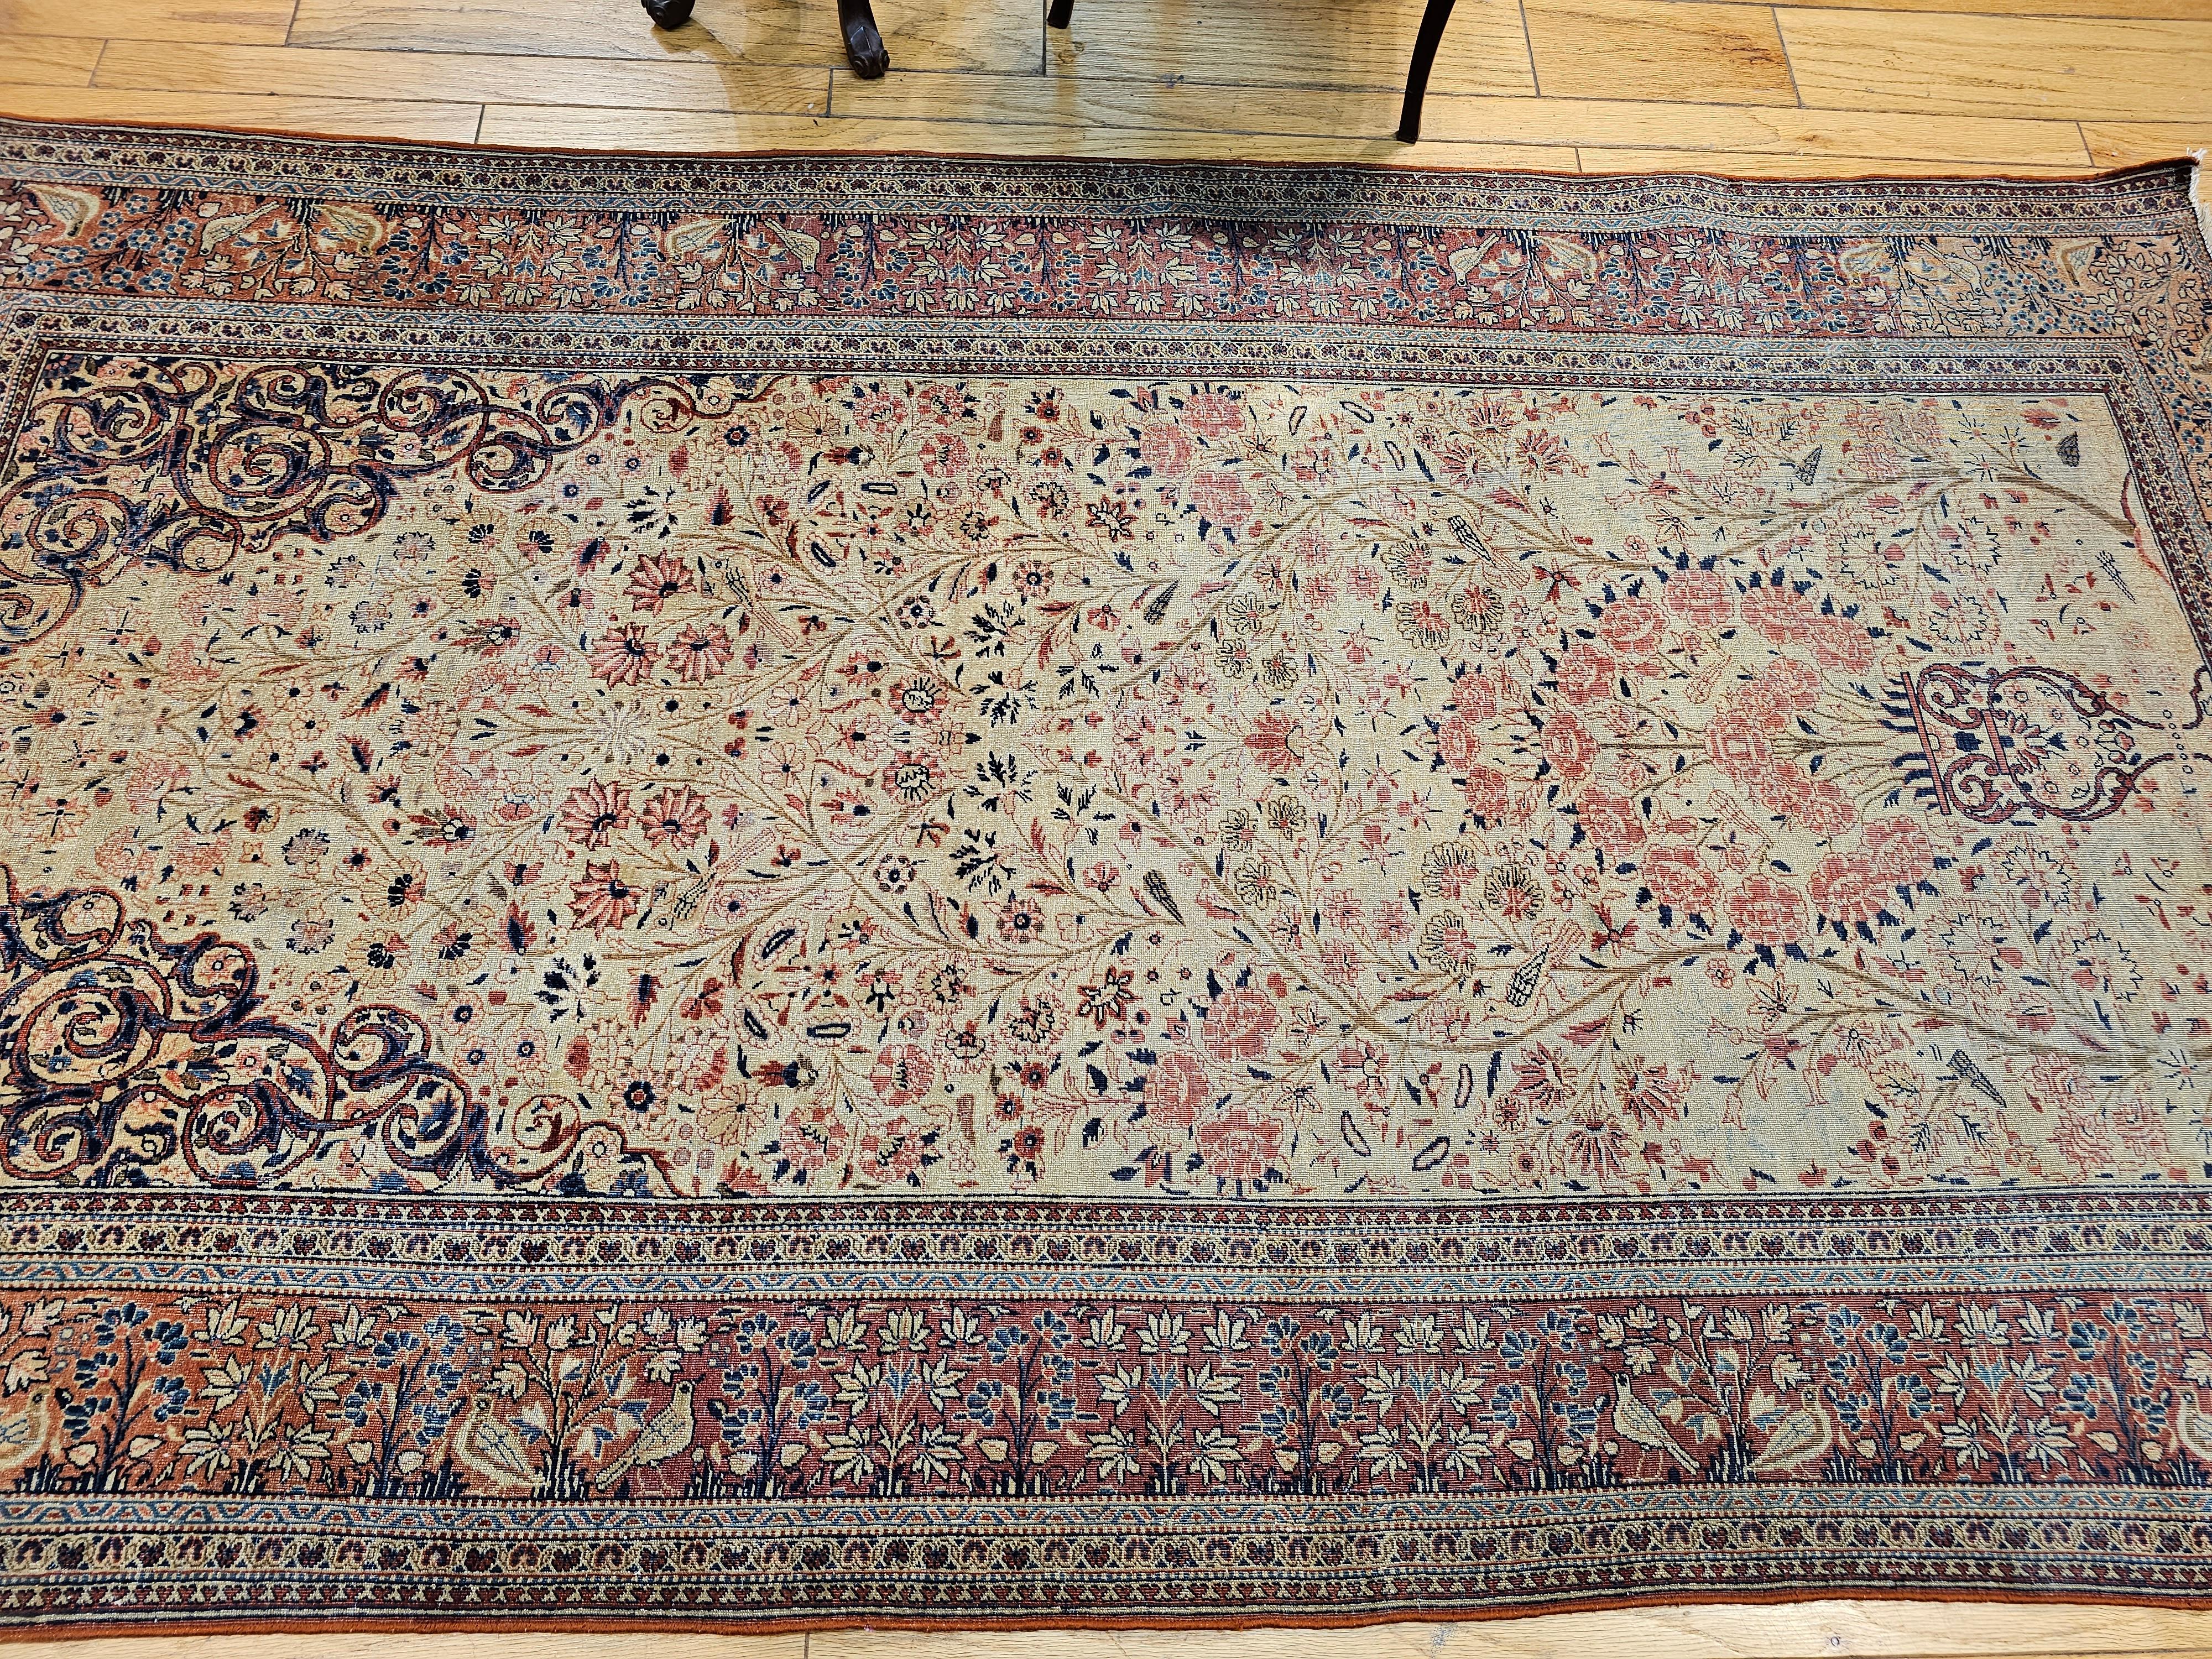 19th Century Persian Kashan Vase “Tree of Life” Rug in Ivory, Brick Red, Navy For Sale 11